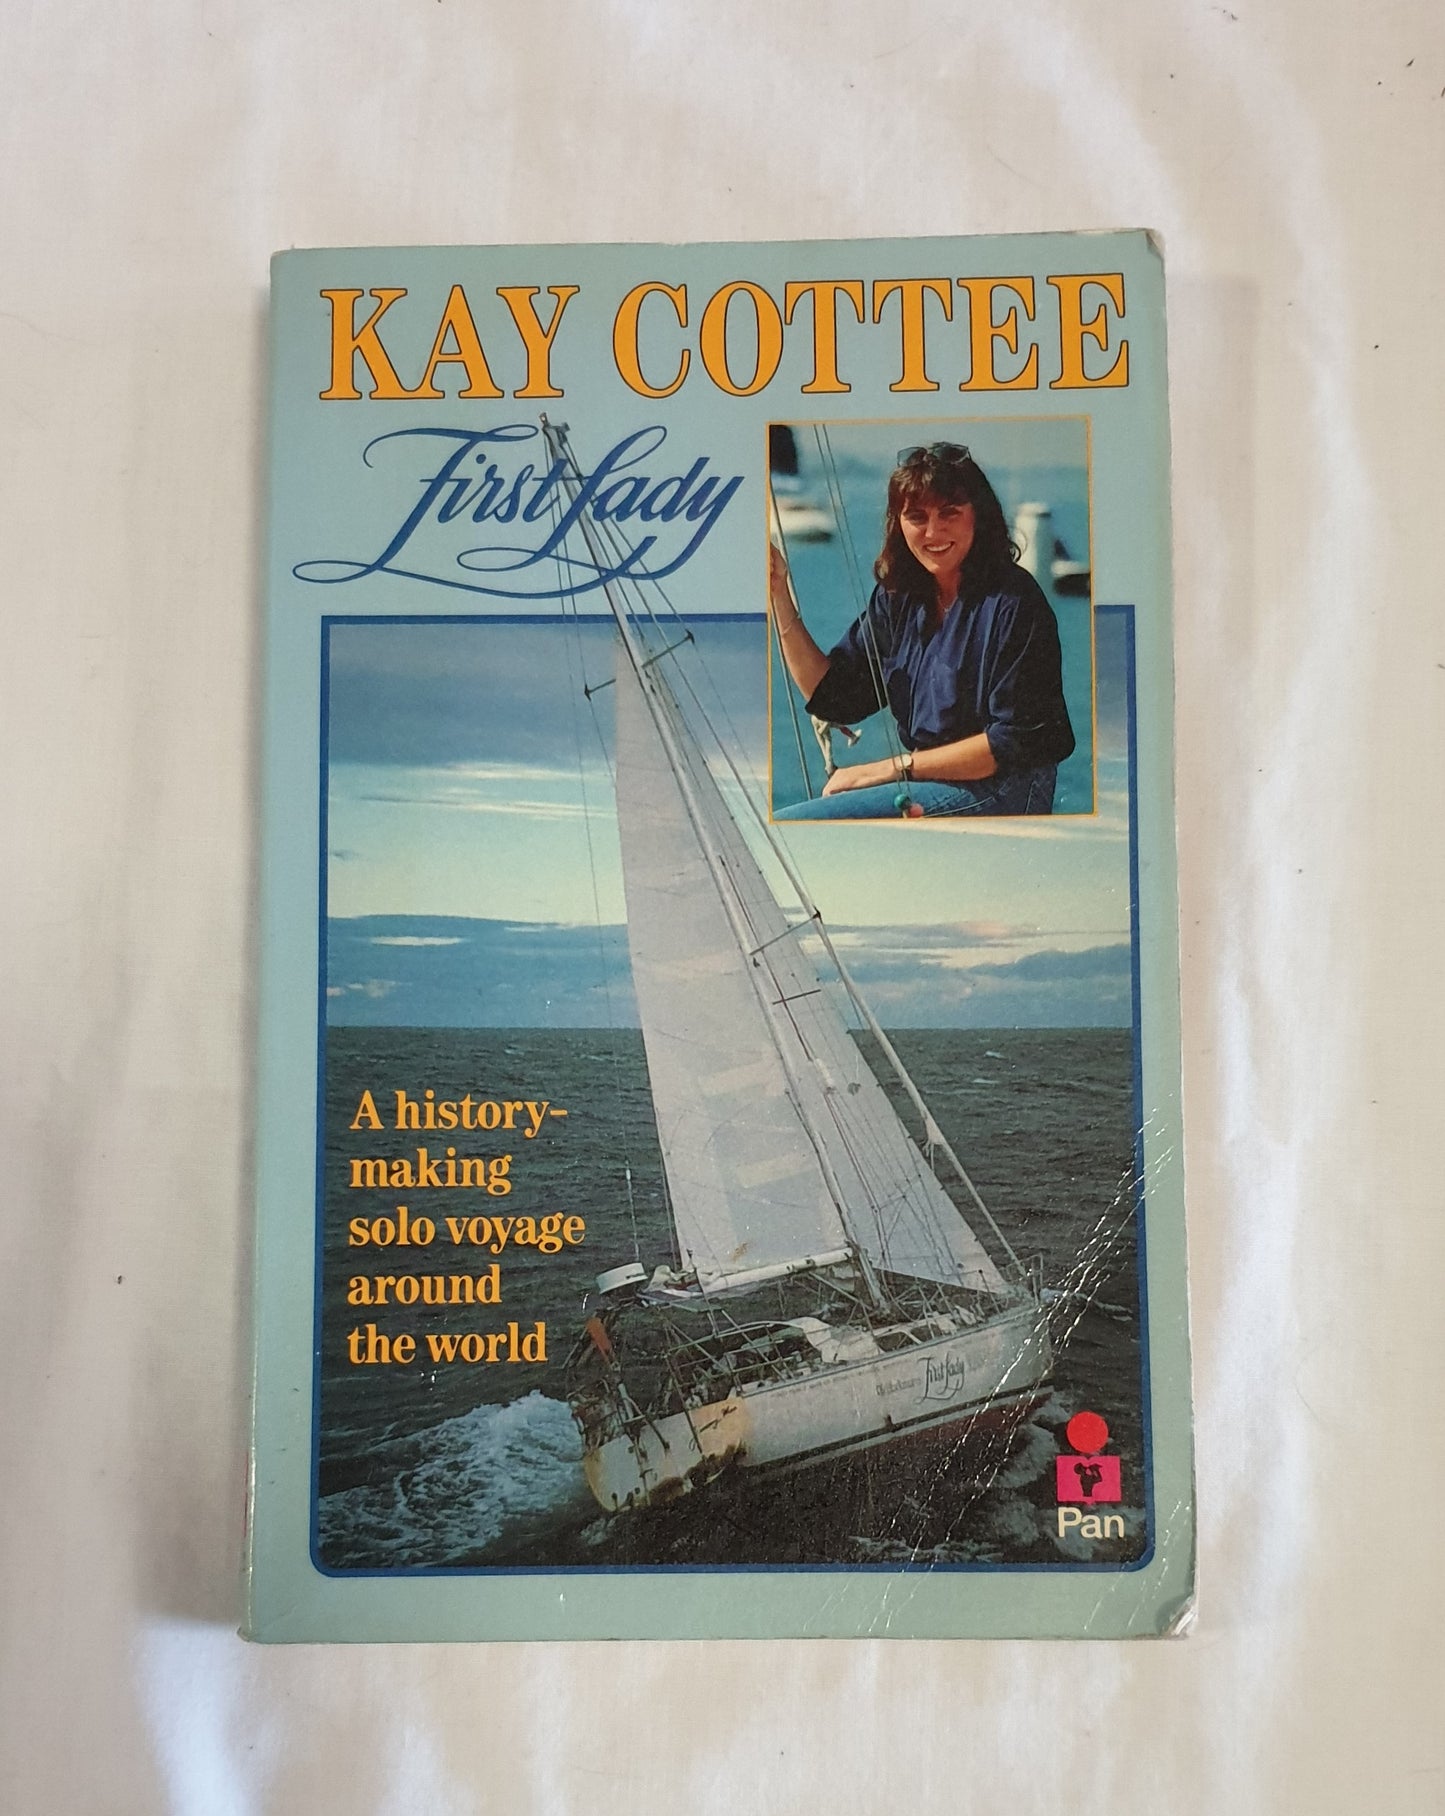 First Lady by Kay Cottee